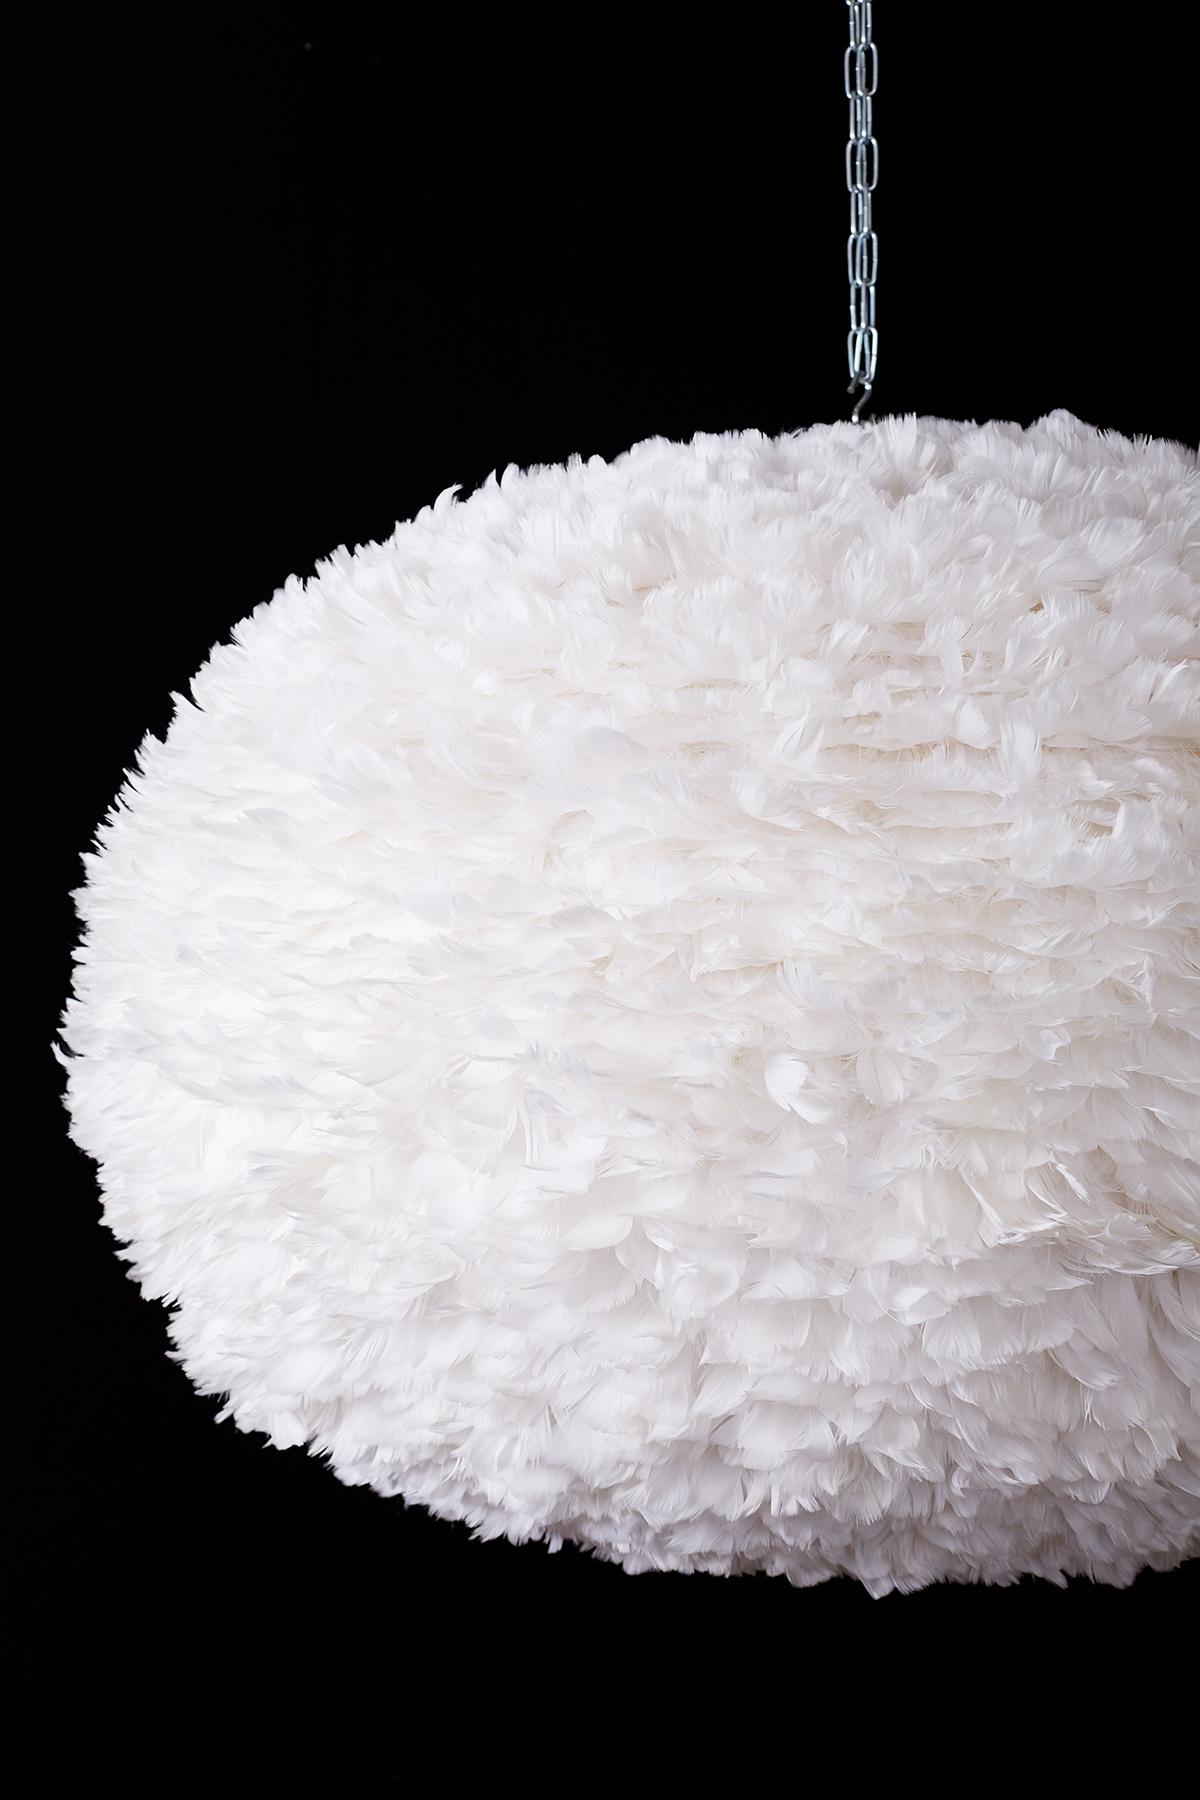 Grand goose feather pendant light chandelier by Soren Ravn Christiansen for Vita Copenhagen. features a huge floating orb covered in white goose feathers that makes a statement. Produces beautiful diffused light from its whimsical design. Includes a